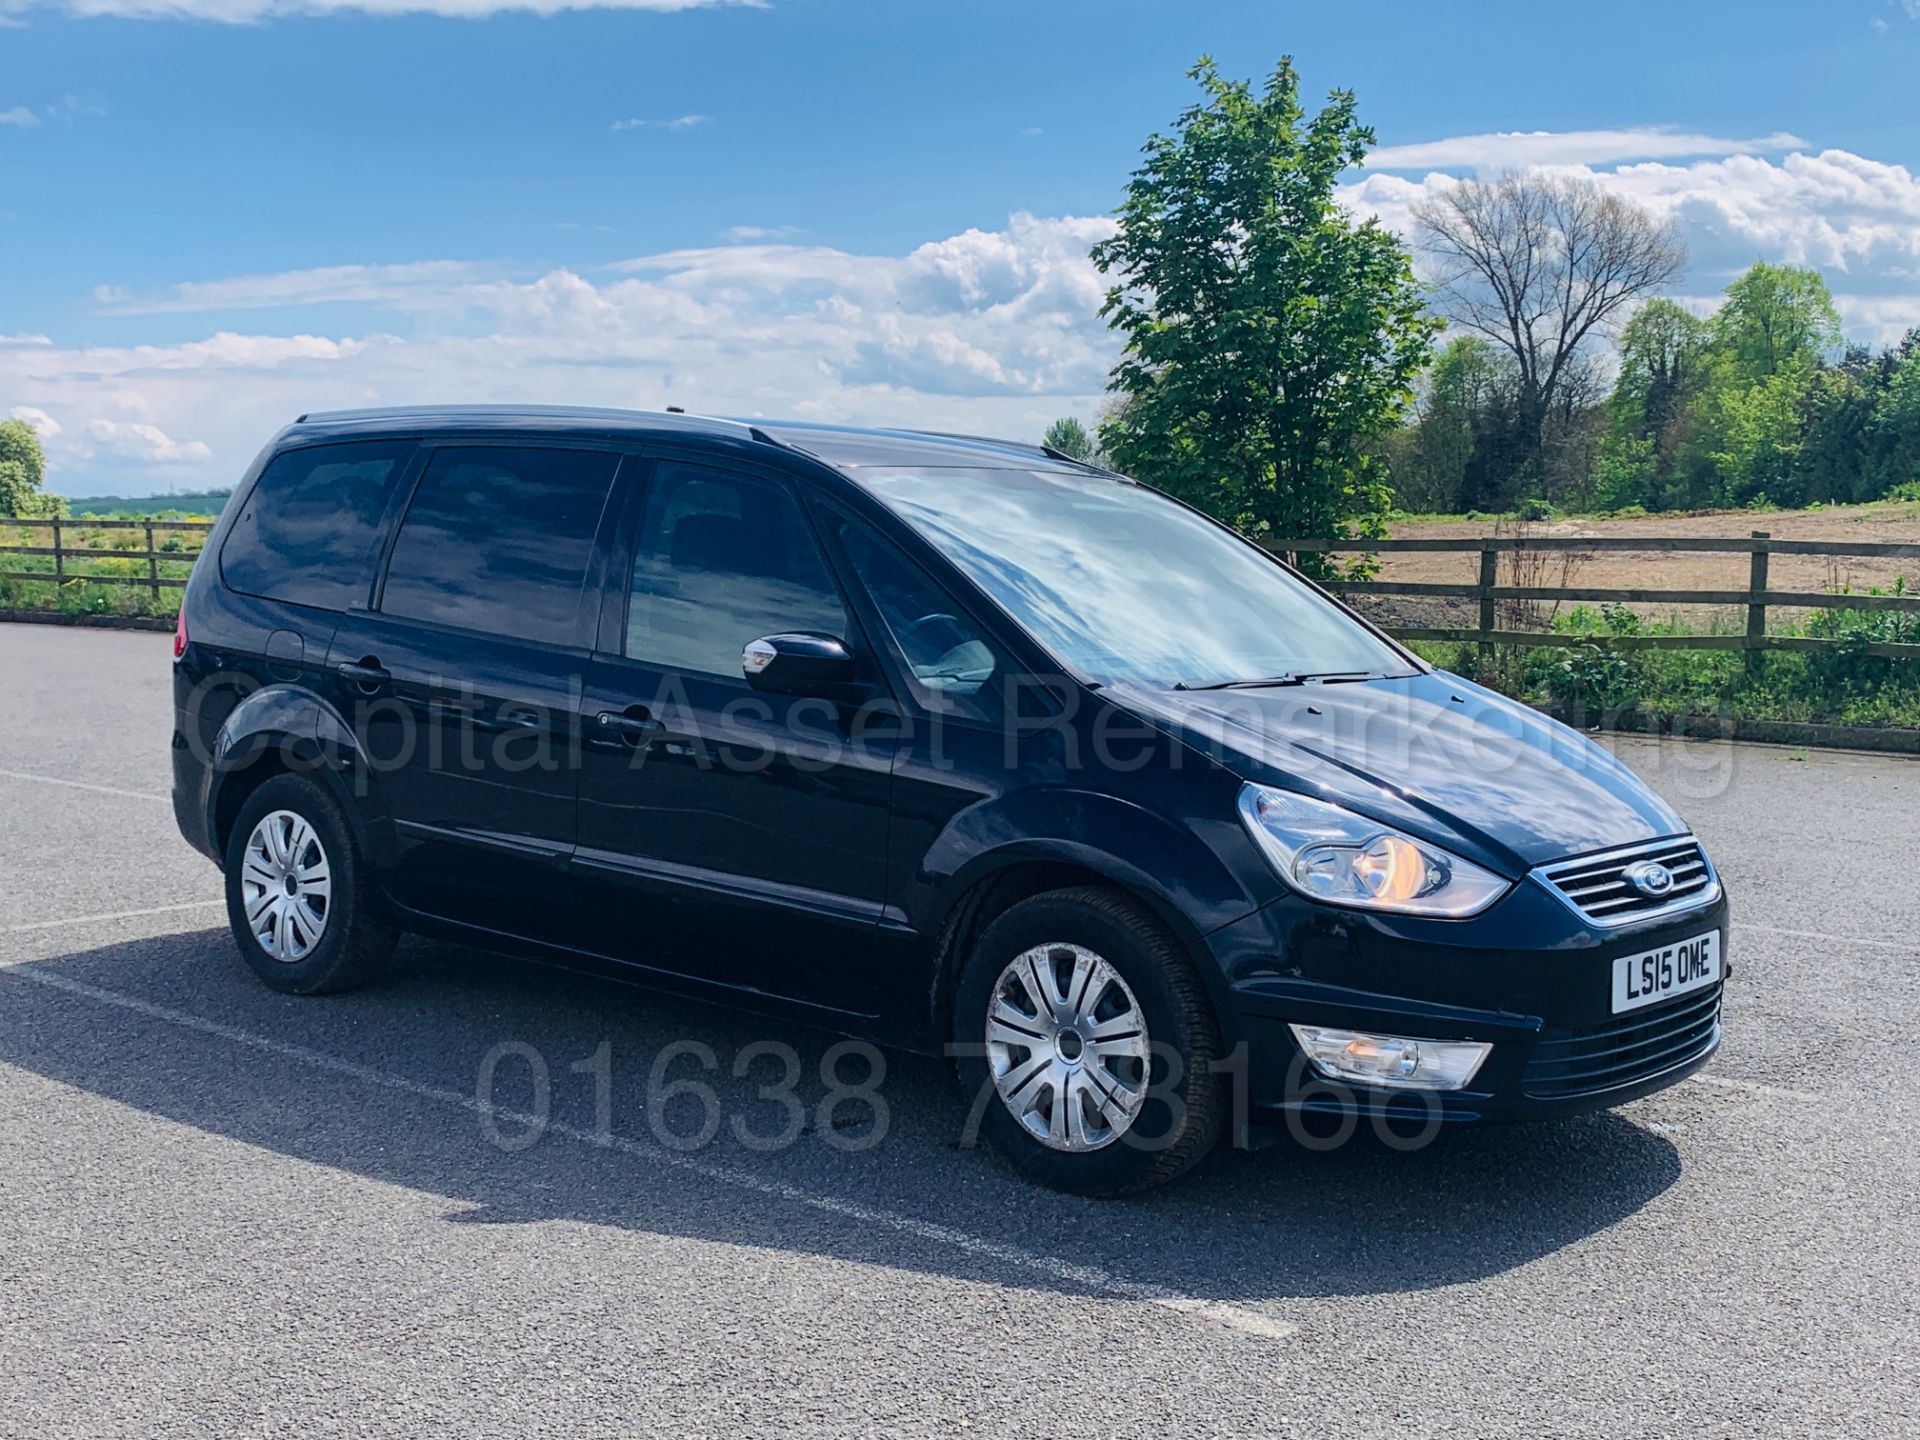 (On Sale) FORD GALAXY *ZETEC* 7 SEATER MPV (2015) '2.0 TDCI - 140 BHP - POWER SHIFT' (1 OWNER) - Image 9 of 37